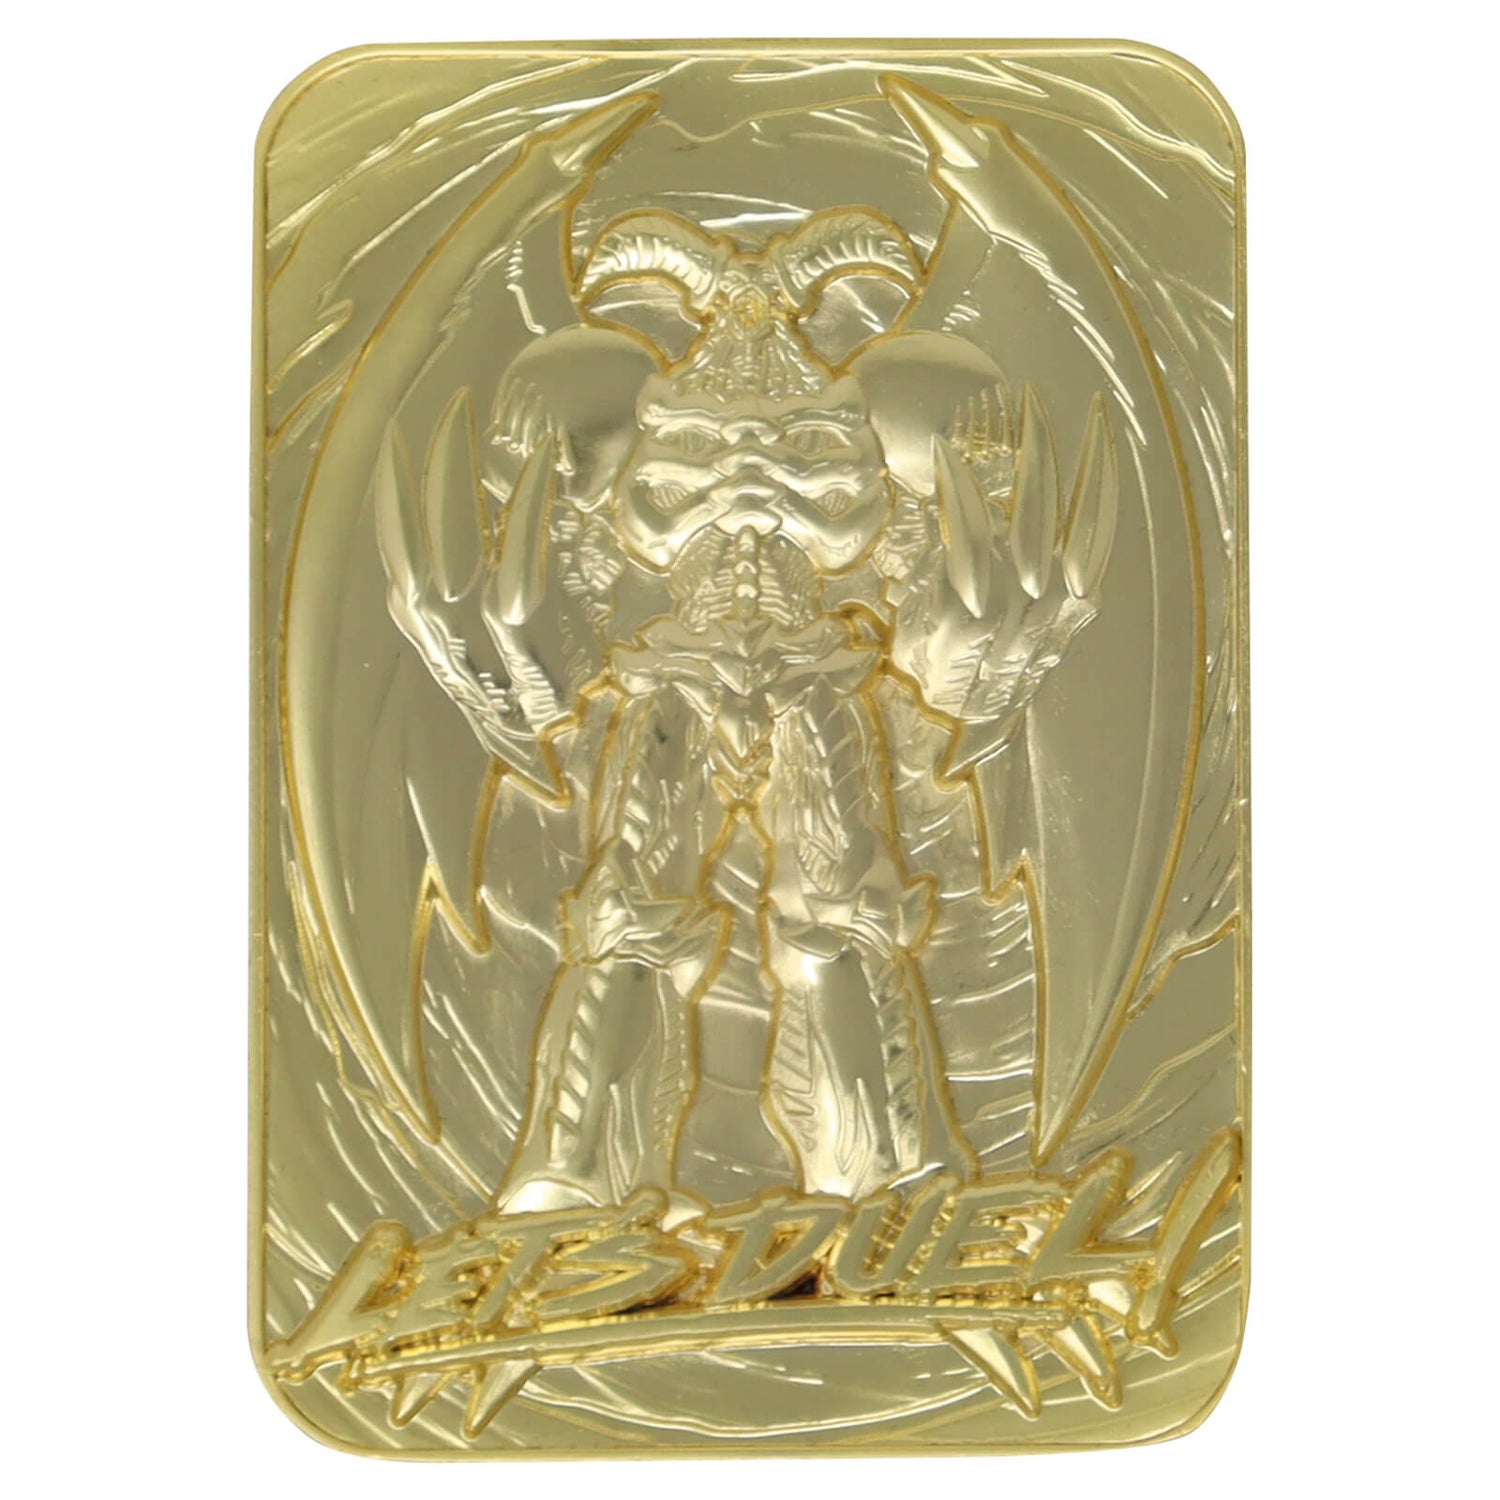 Fanattik Yu-Gi-Oh! Summoned Skull 24K Gold Plated Limited Edition Collectible Metal Card